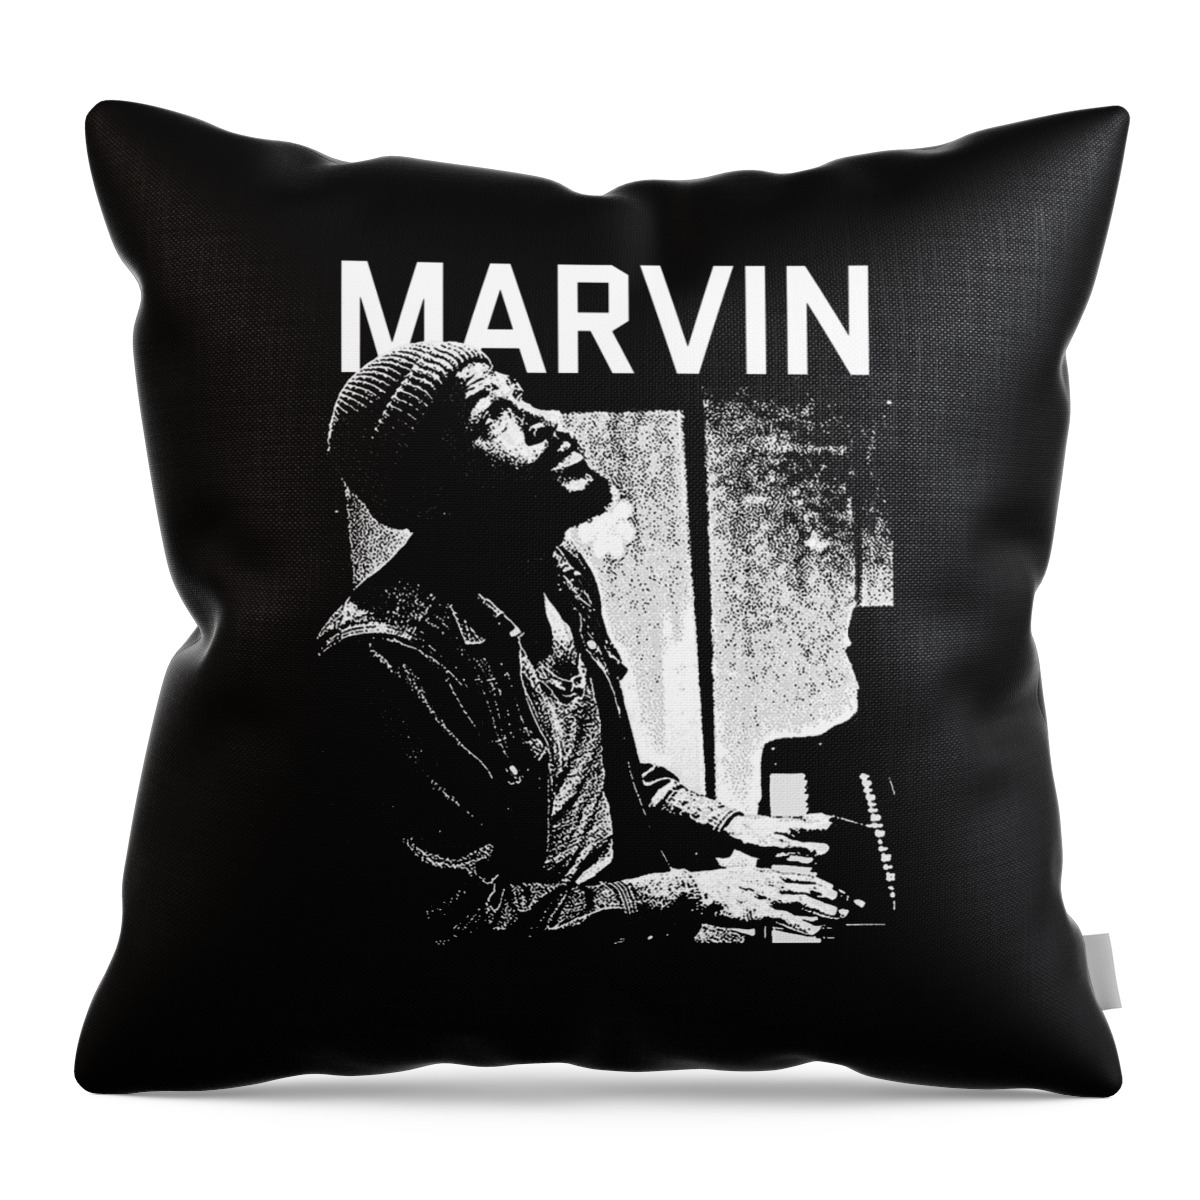 Marvin Gaye Throw Pillow featuring the digital art Marvin Gaye Tribute Design by Notorious Artist